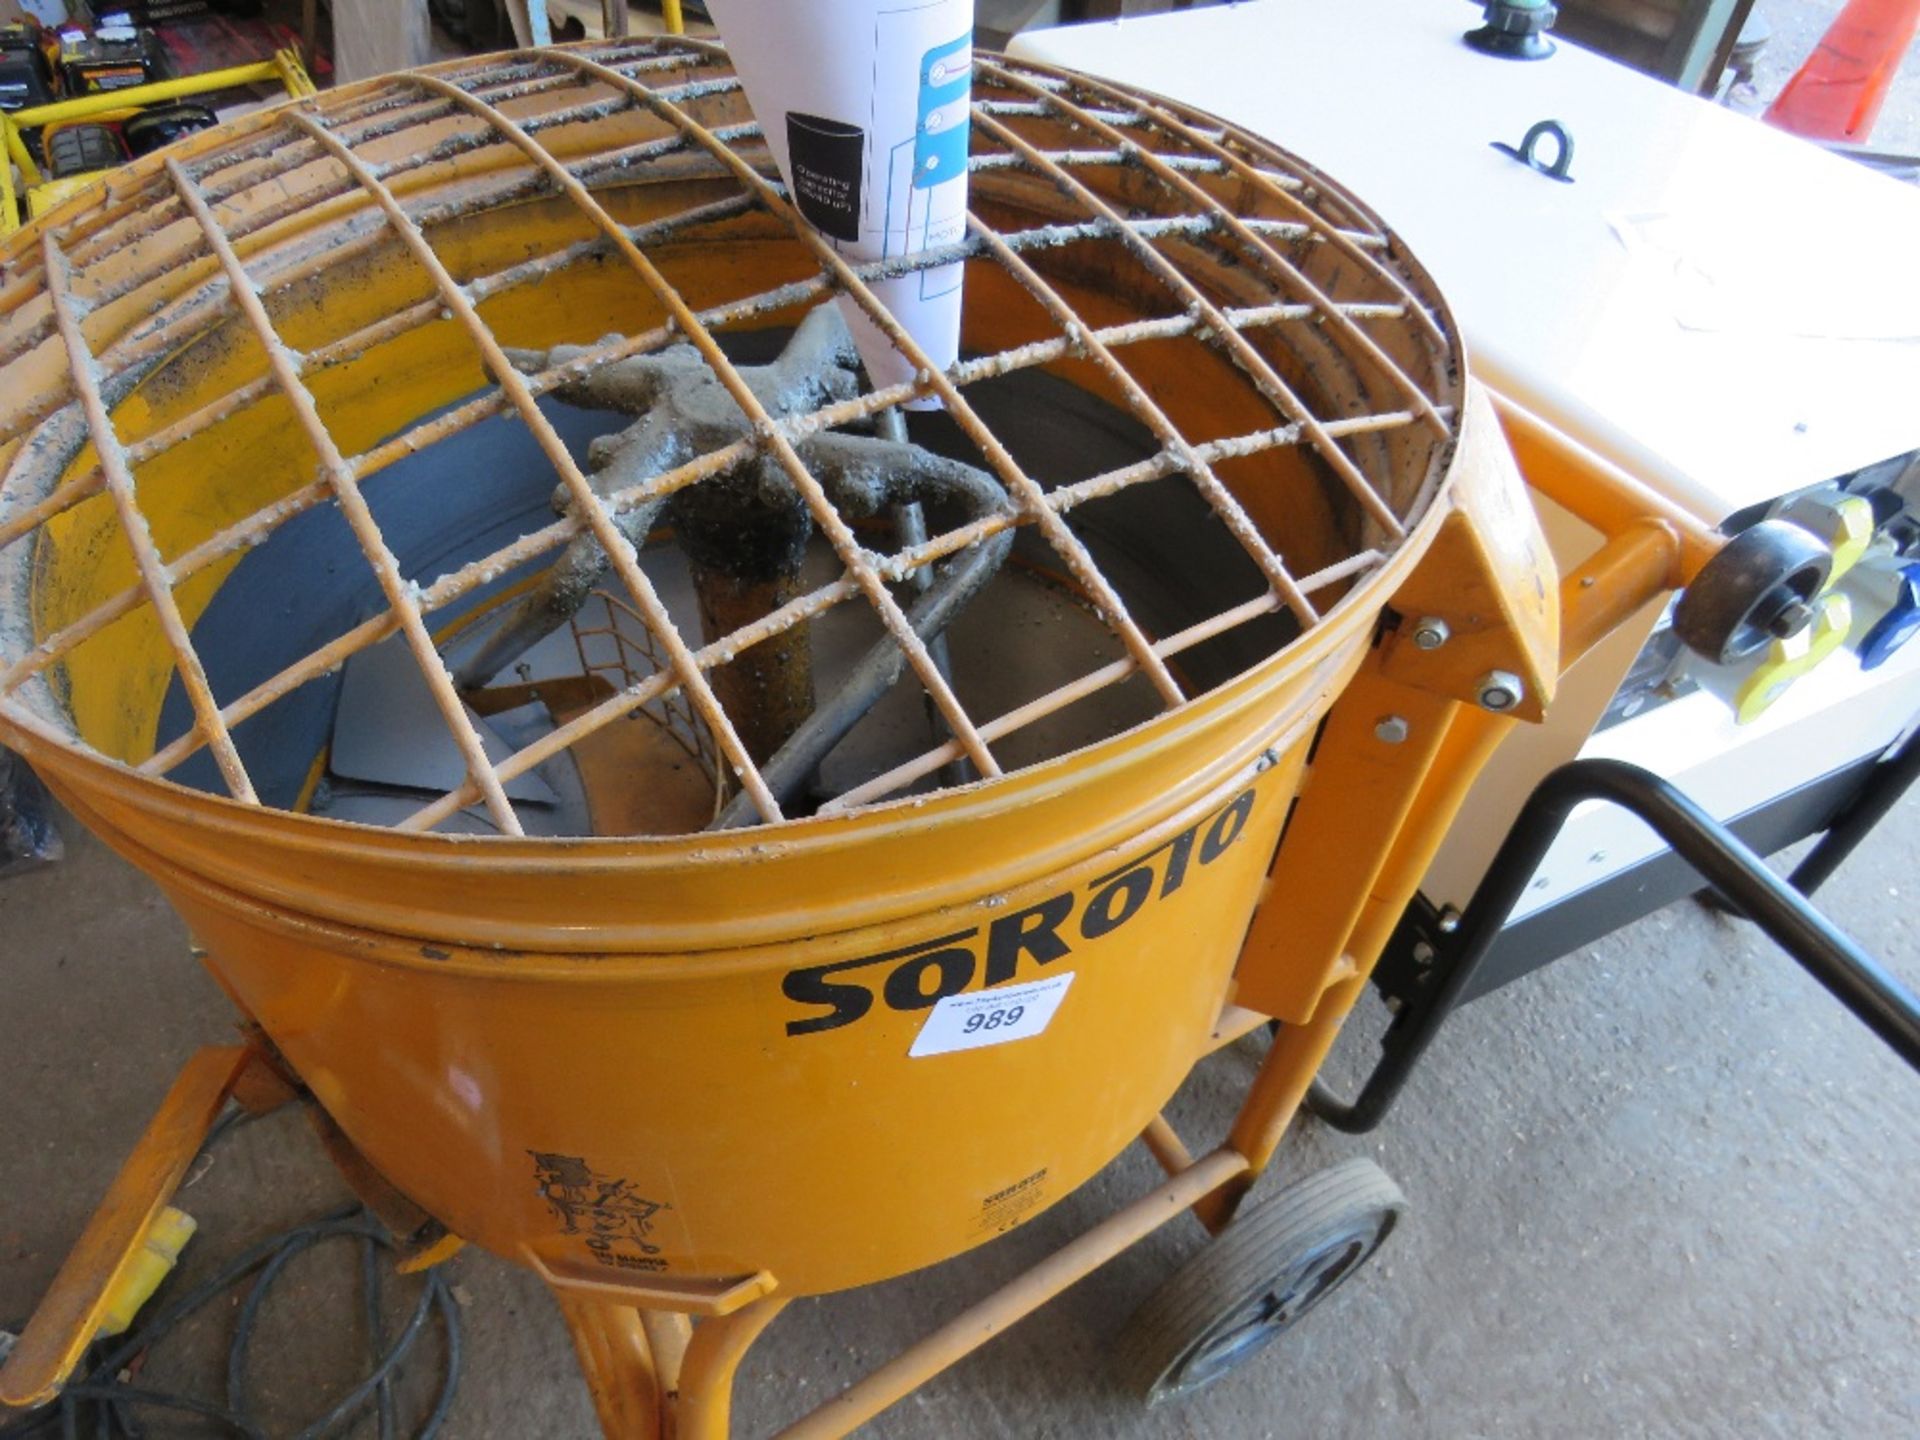 SOROTO 100L-30 FORCED ACTION MIXER. 110VOLT POWERED. WHEN TESTEDW AS SEEN TO RUN AND MIX...DIRECT EX